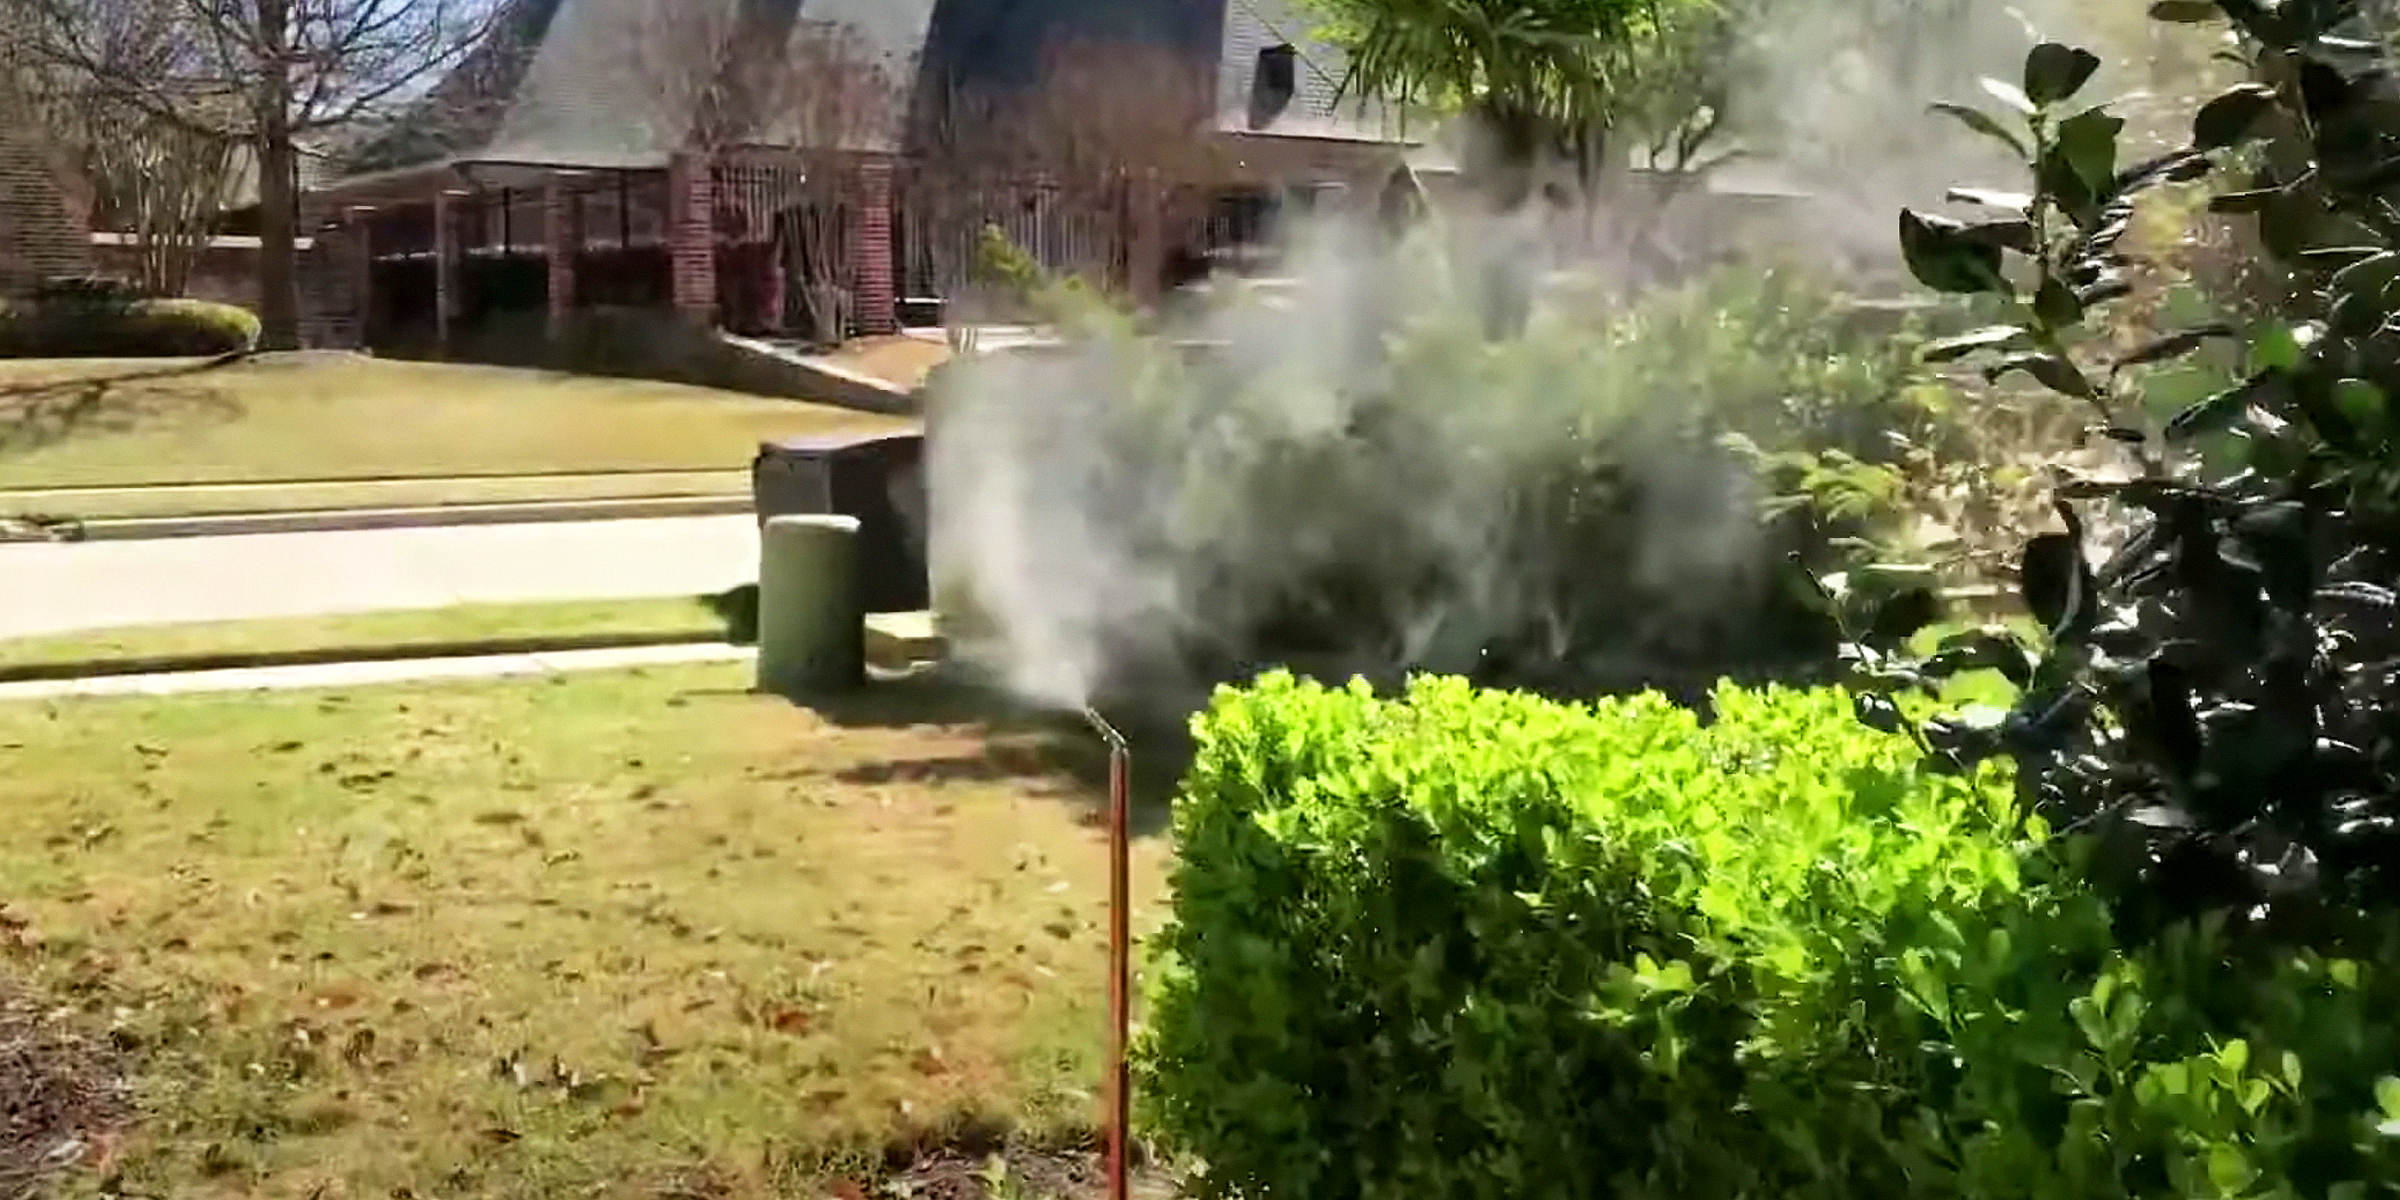 An up-close photo of a mosquito misting system | Source: YouTube/@texanmosquitosystems4178